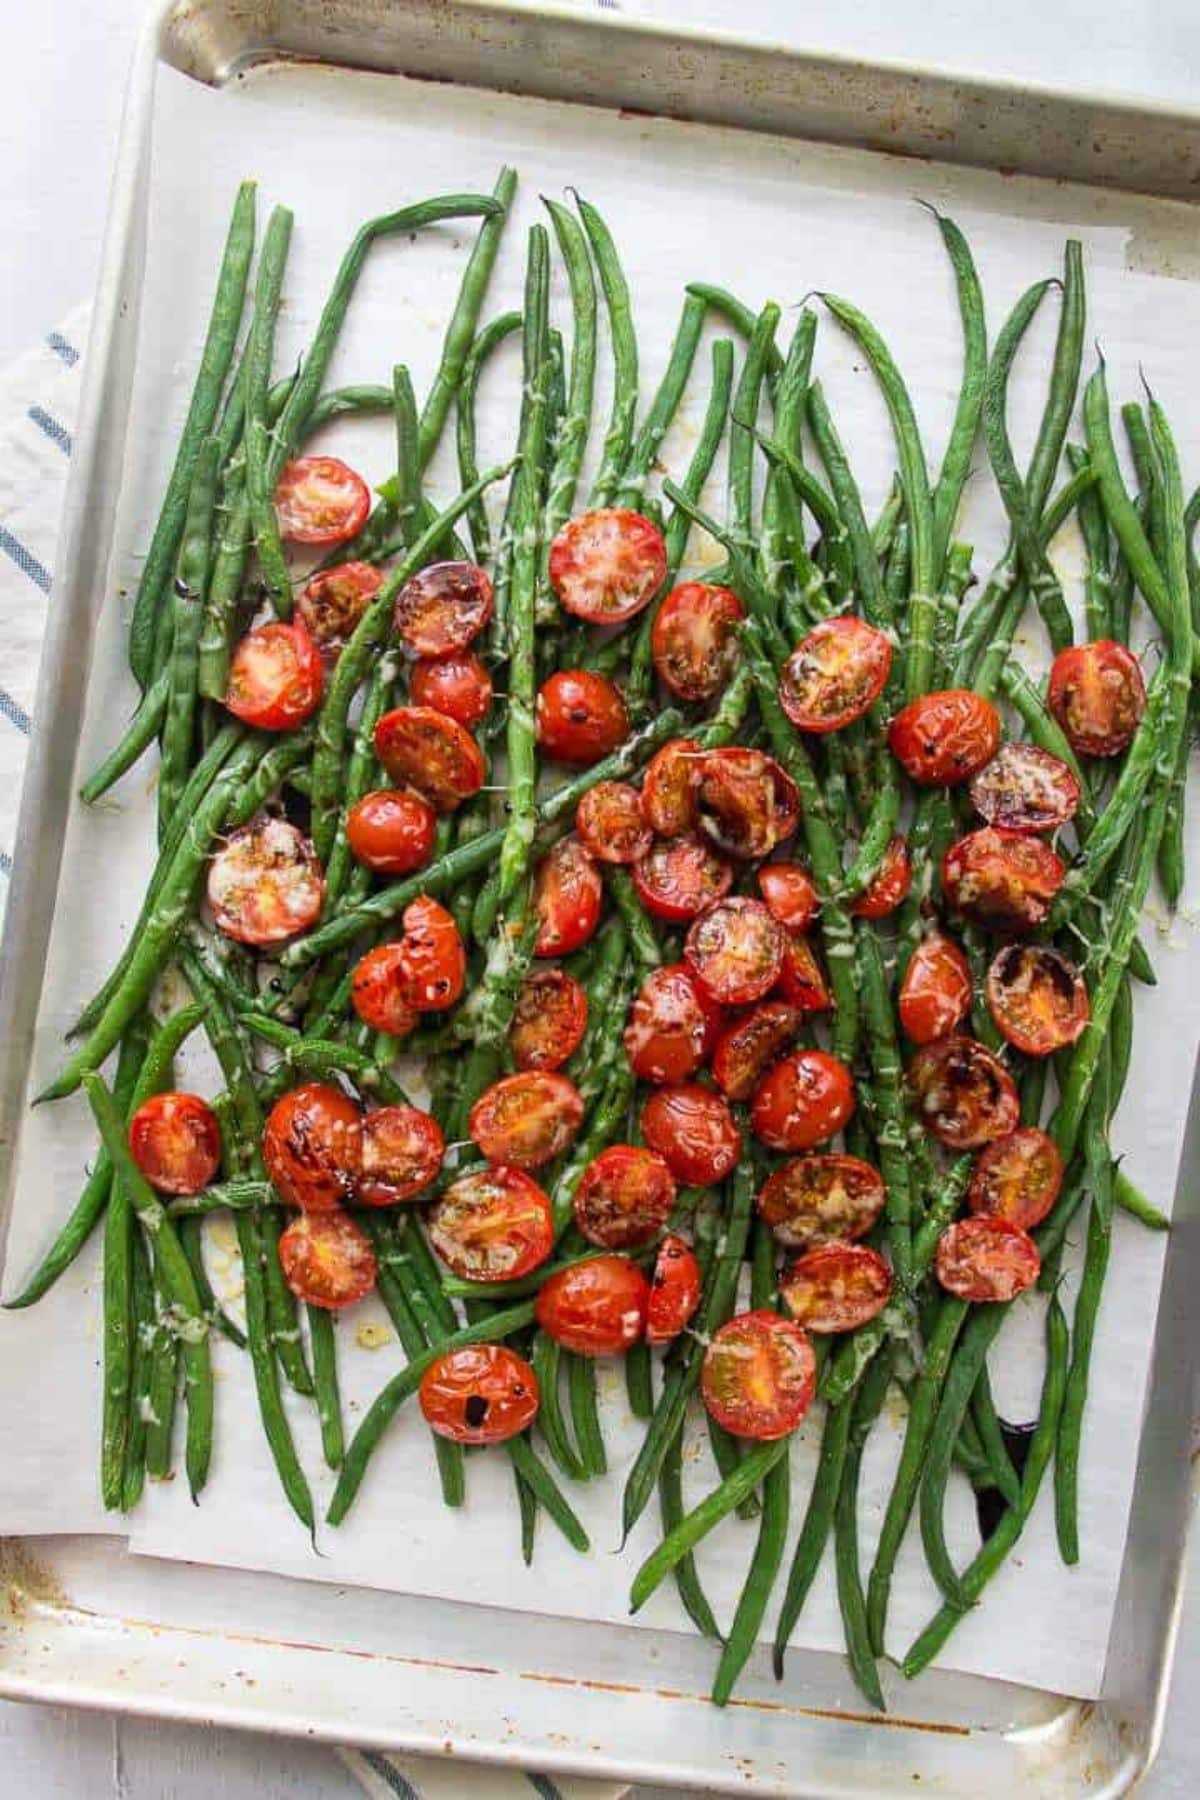 Healthy Mediterranean Green Beans and Tomatoes on a baking tray.